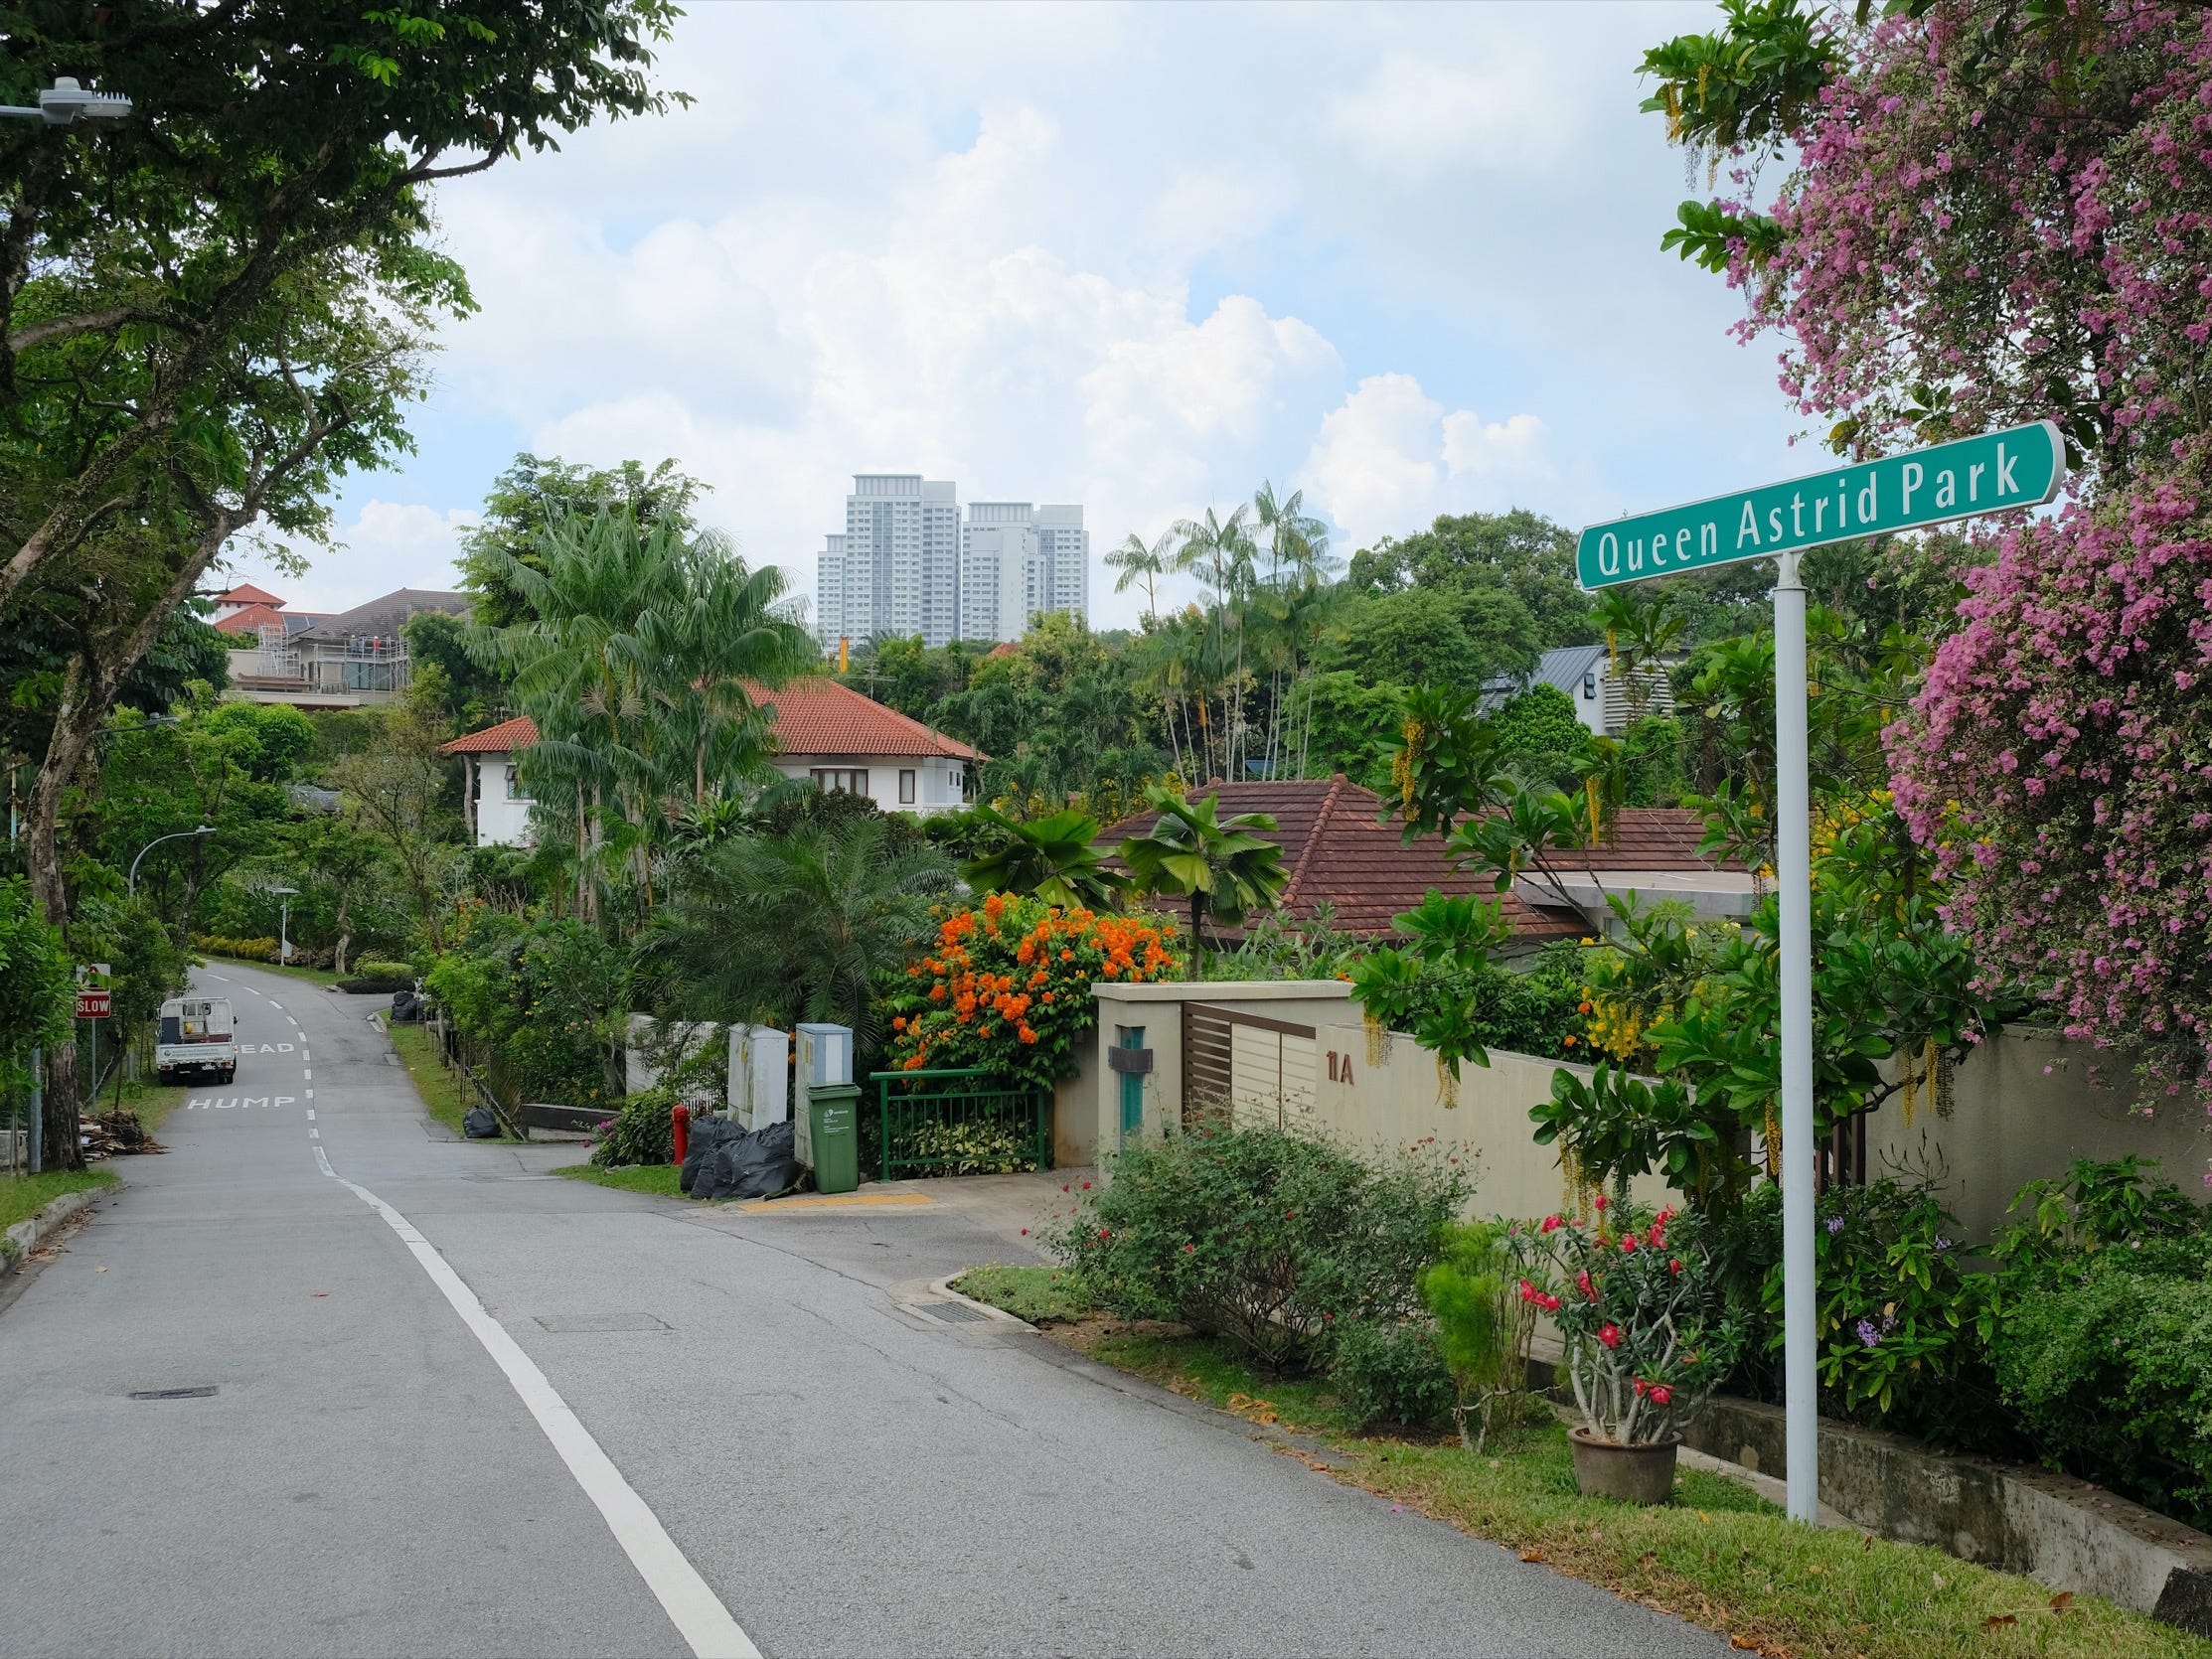 a view of houses and trees at queen astrid park, an upscale street in singapore